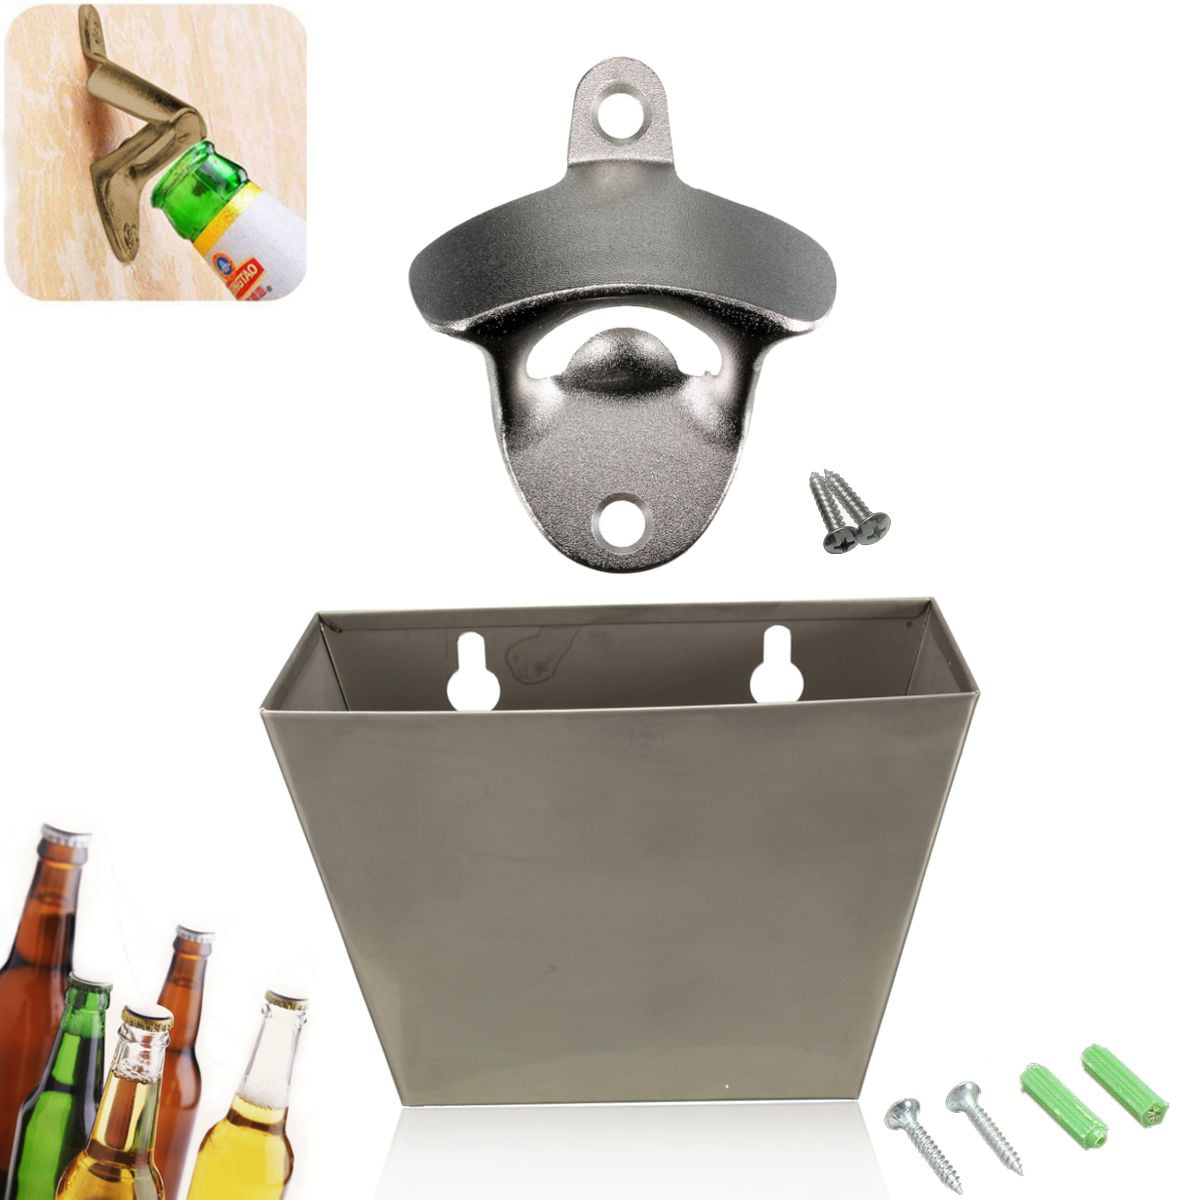 Deck Stainless Steel Wall Mount Beer Bottle Cap Catcher,with 2 Mounting Screws,for Any Kitchen Beer Bottle Cap Catcher Home Bar or Garage Patio